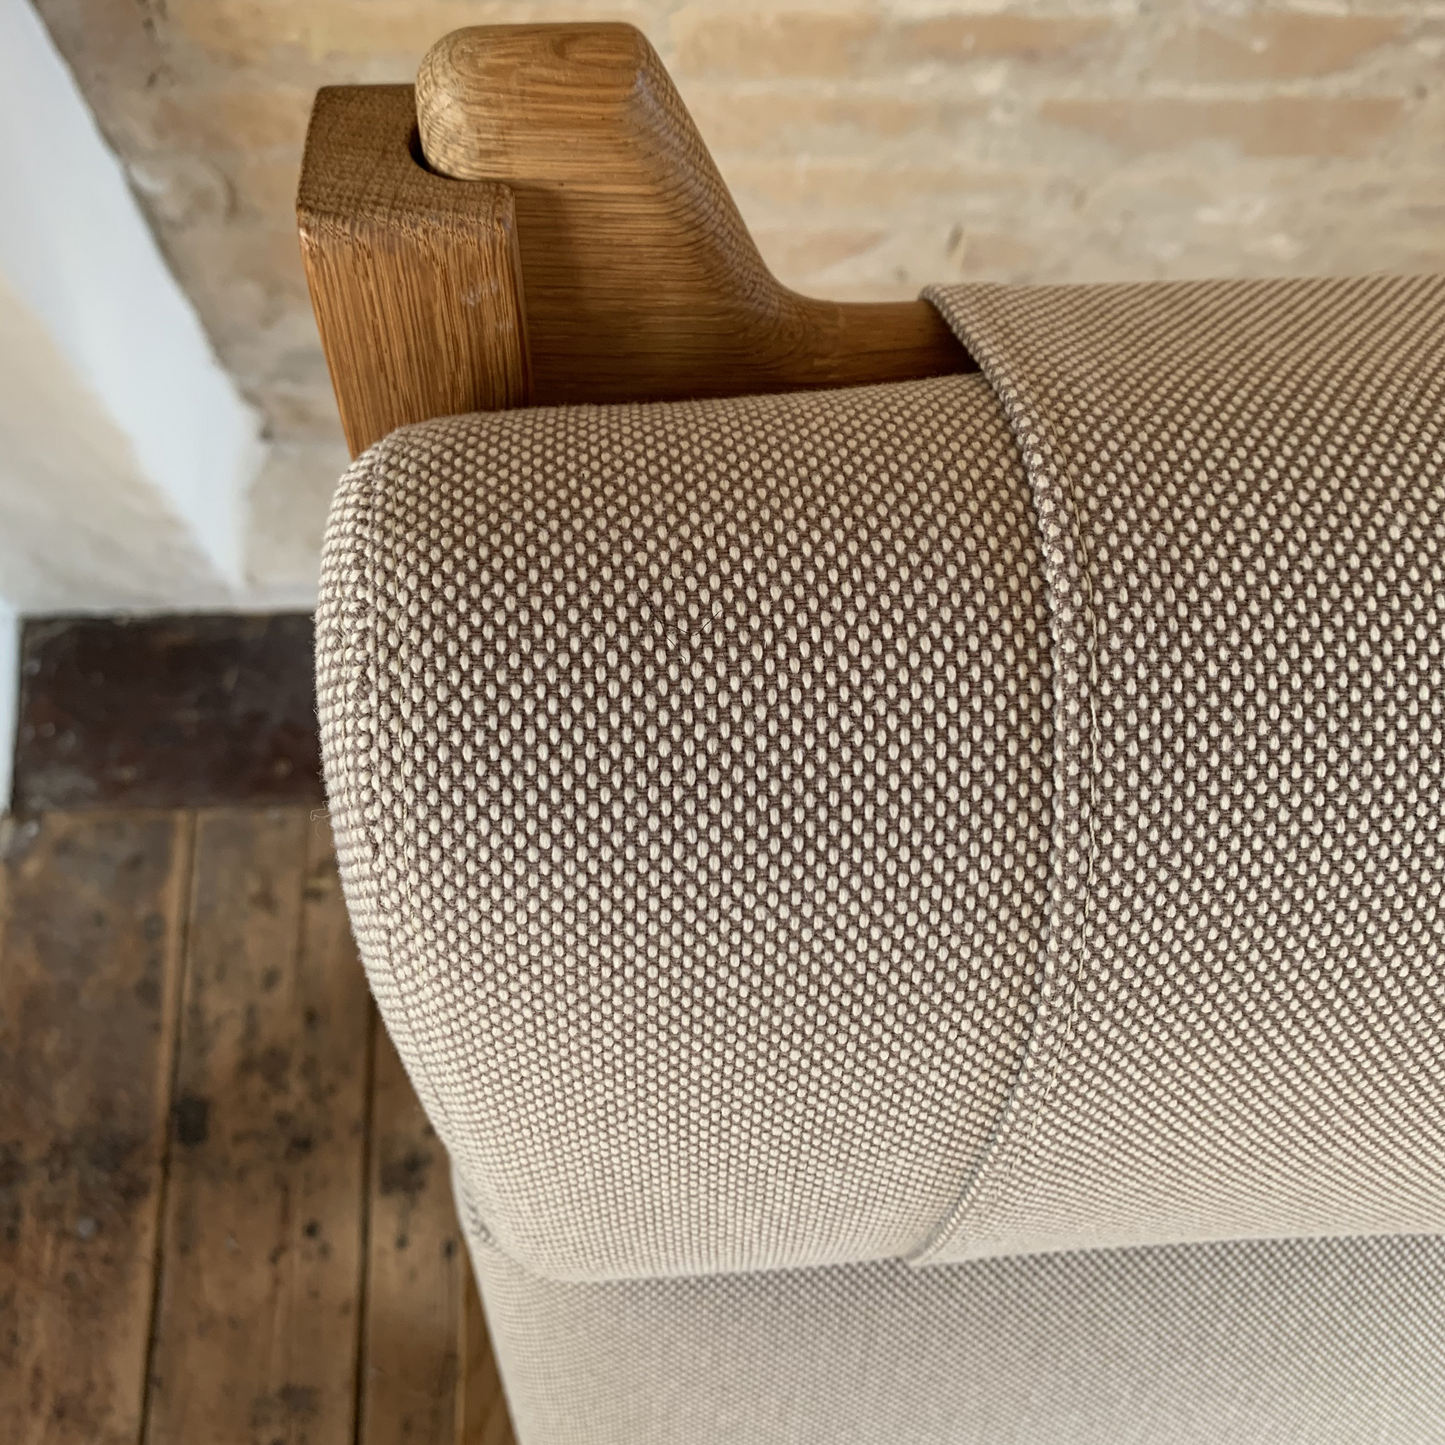 New cushions for Wegner GE375 in Steelcut Trio 3 from Kvadrat